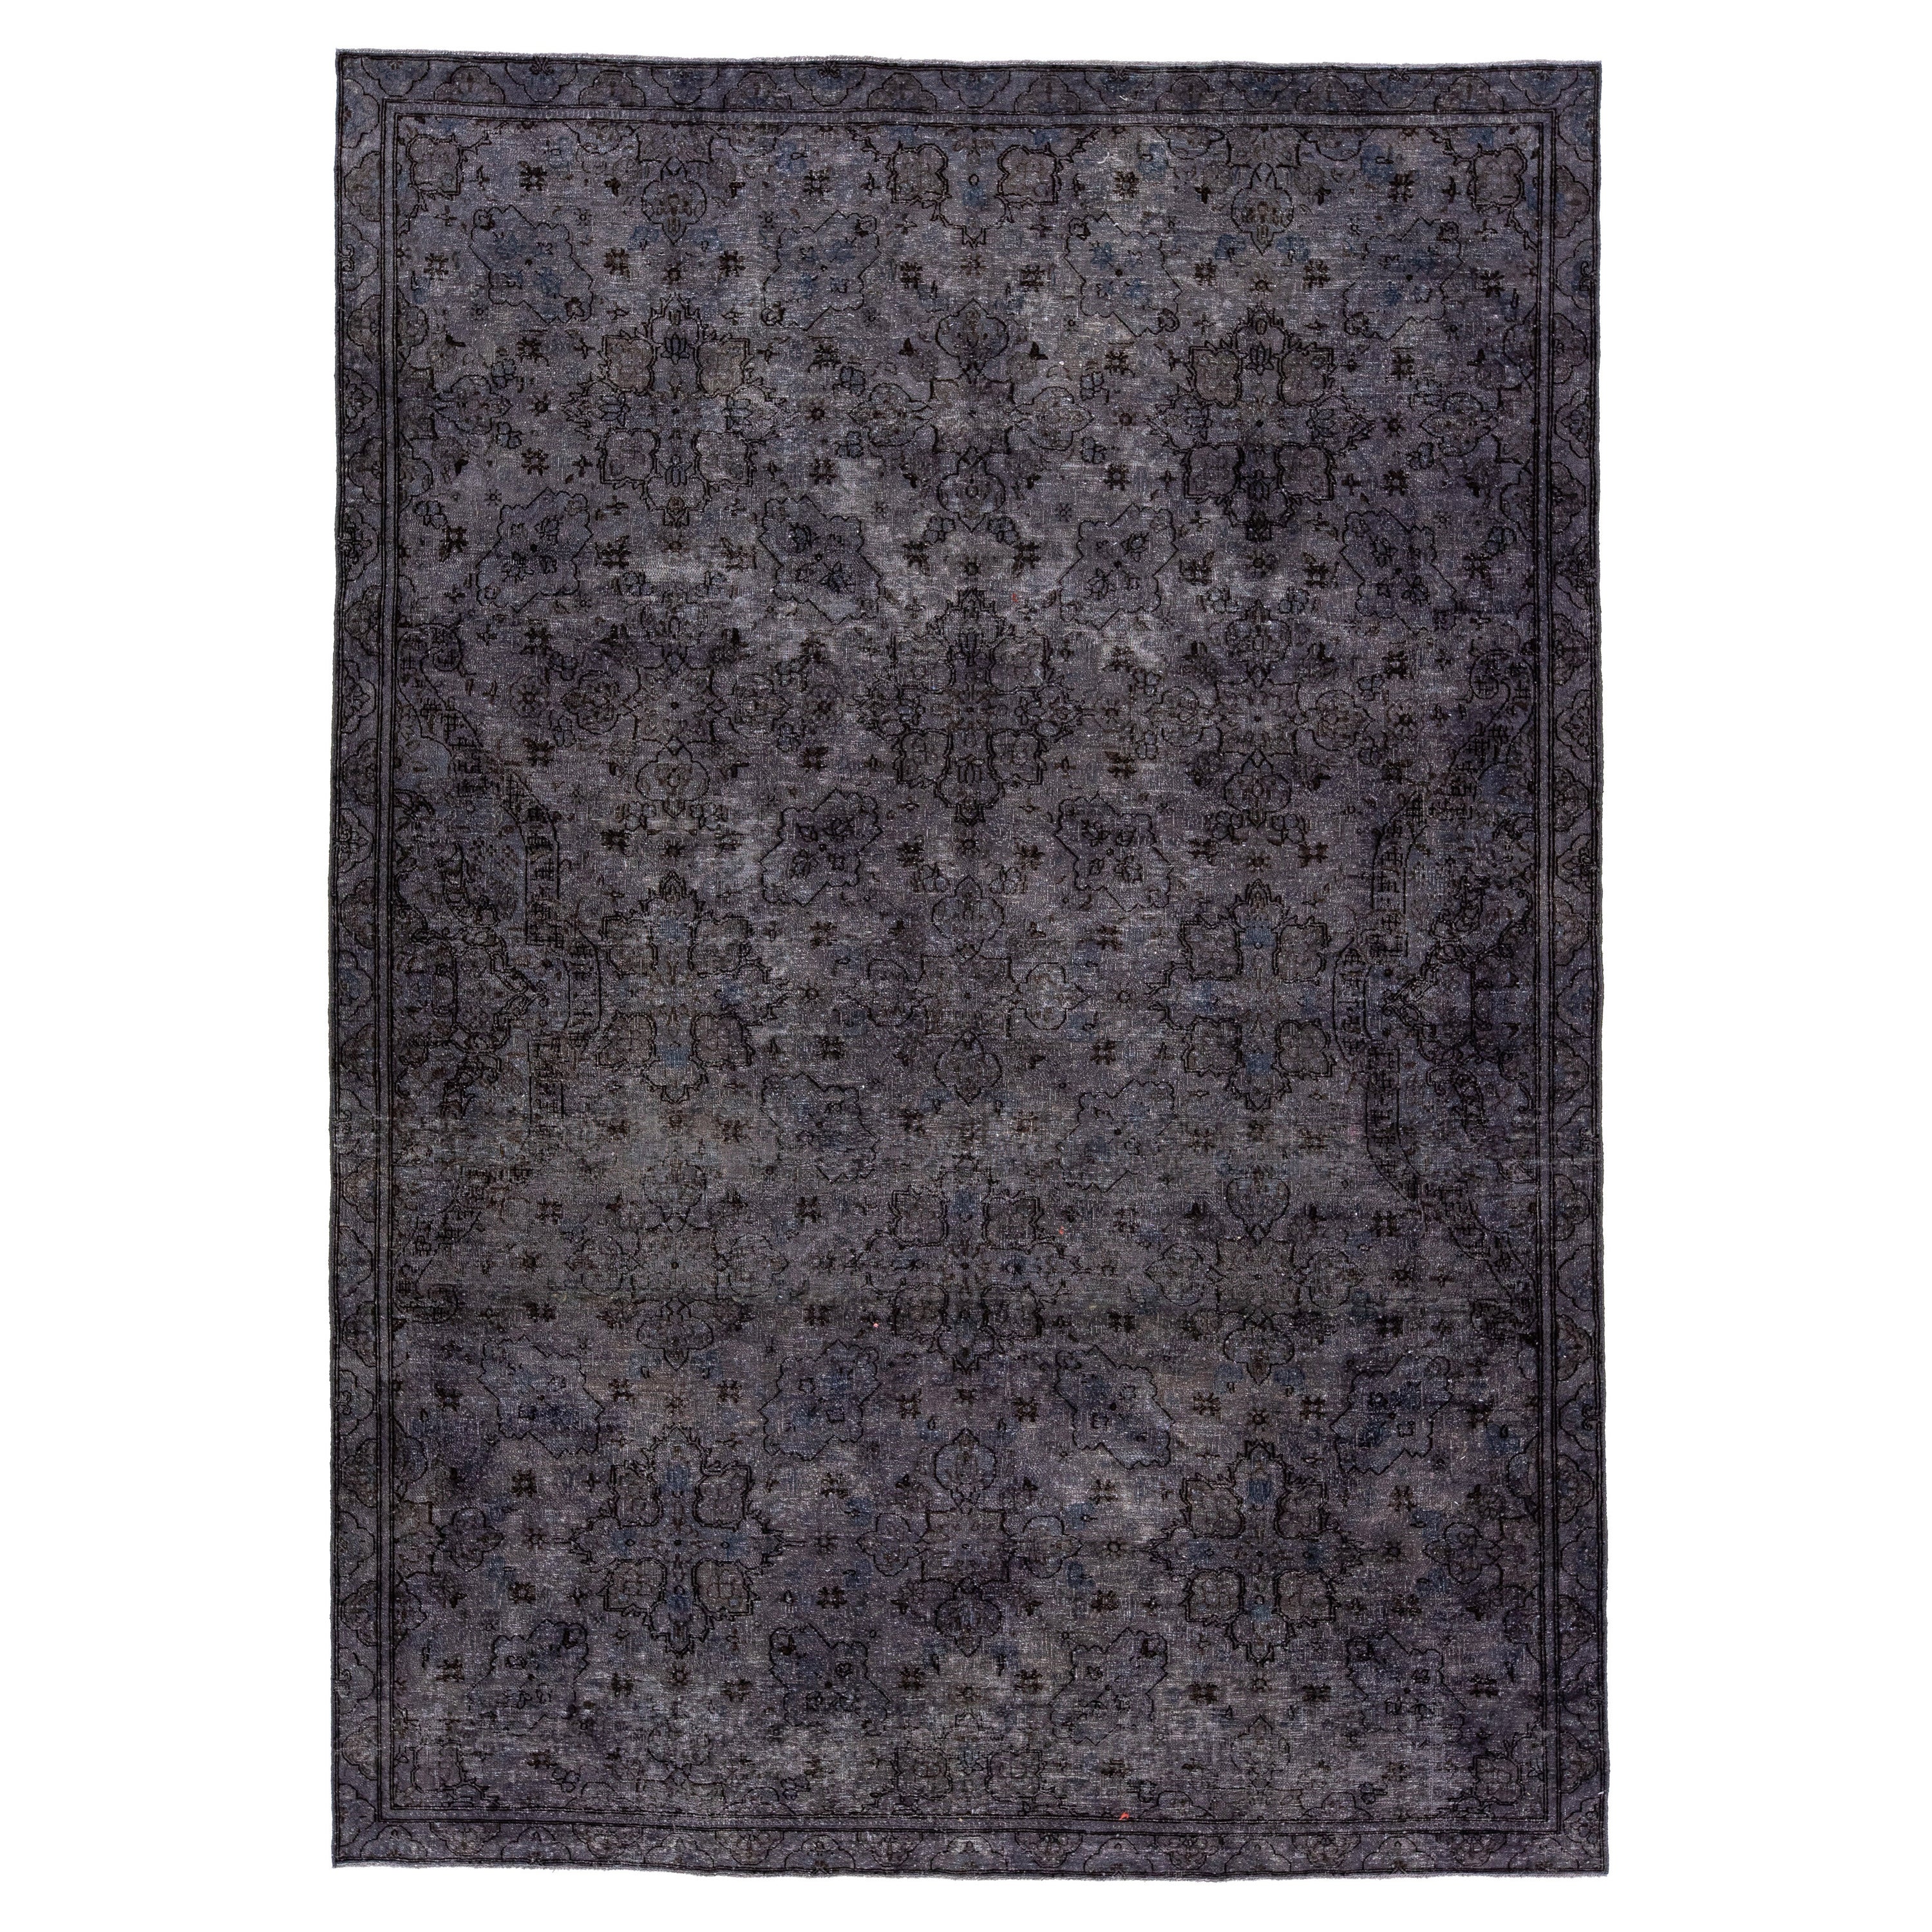 Vintage Persian Overdyed Handmade Floral Gray Wool Rug